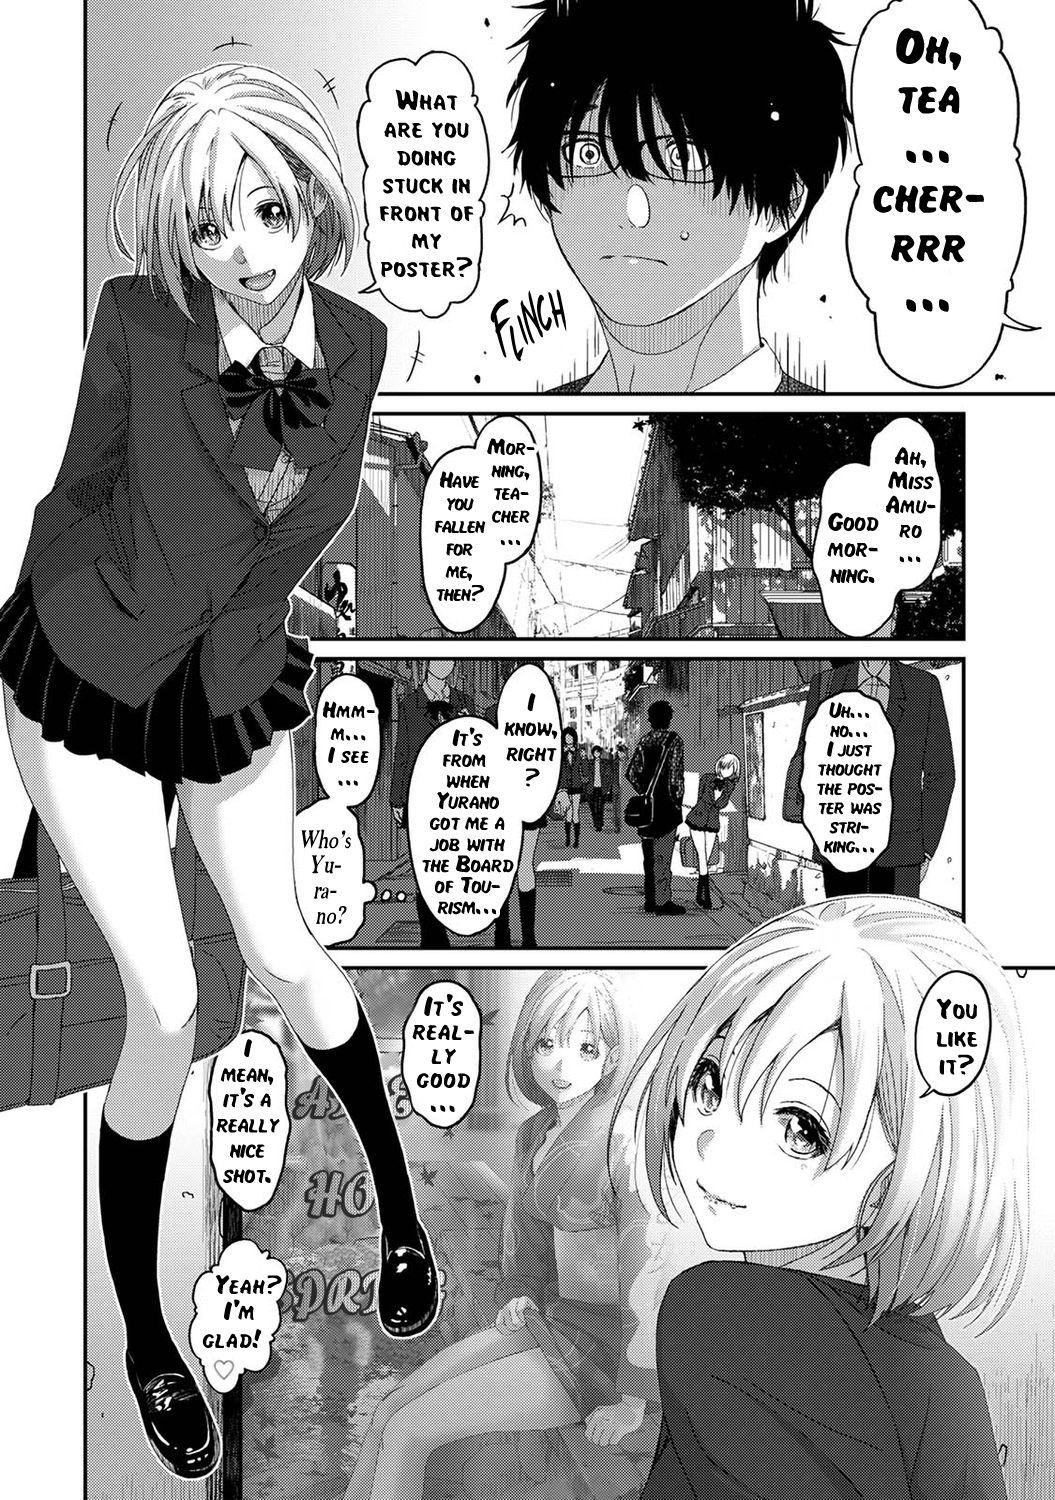 Redhead Itaiamai - Chapter 1 Chica - Page 3